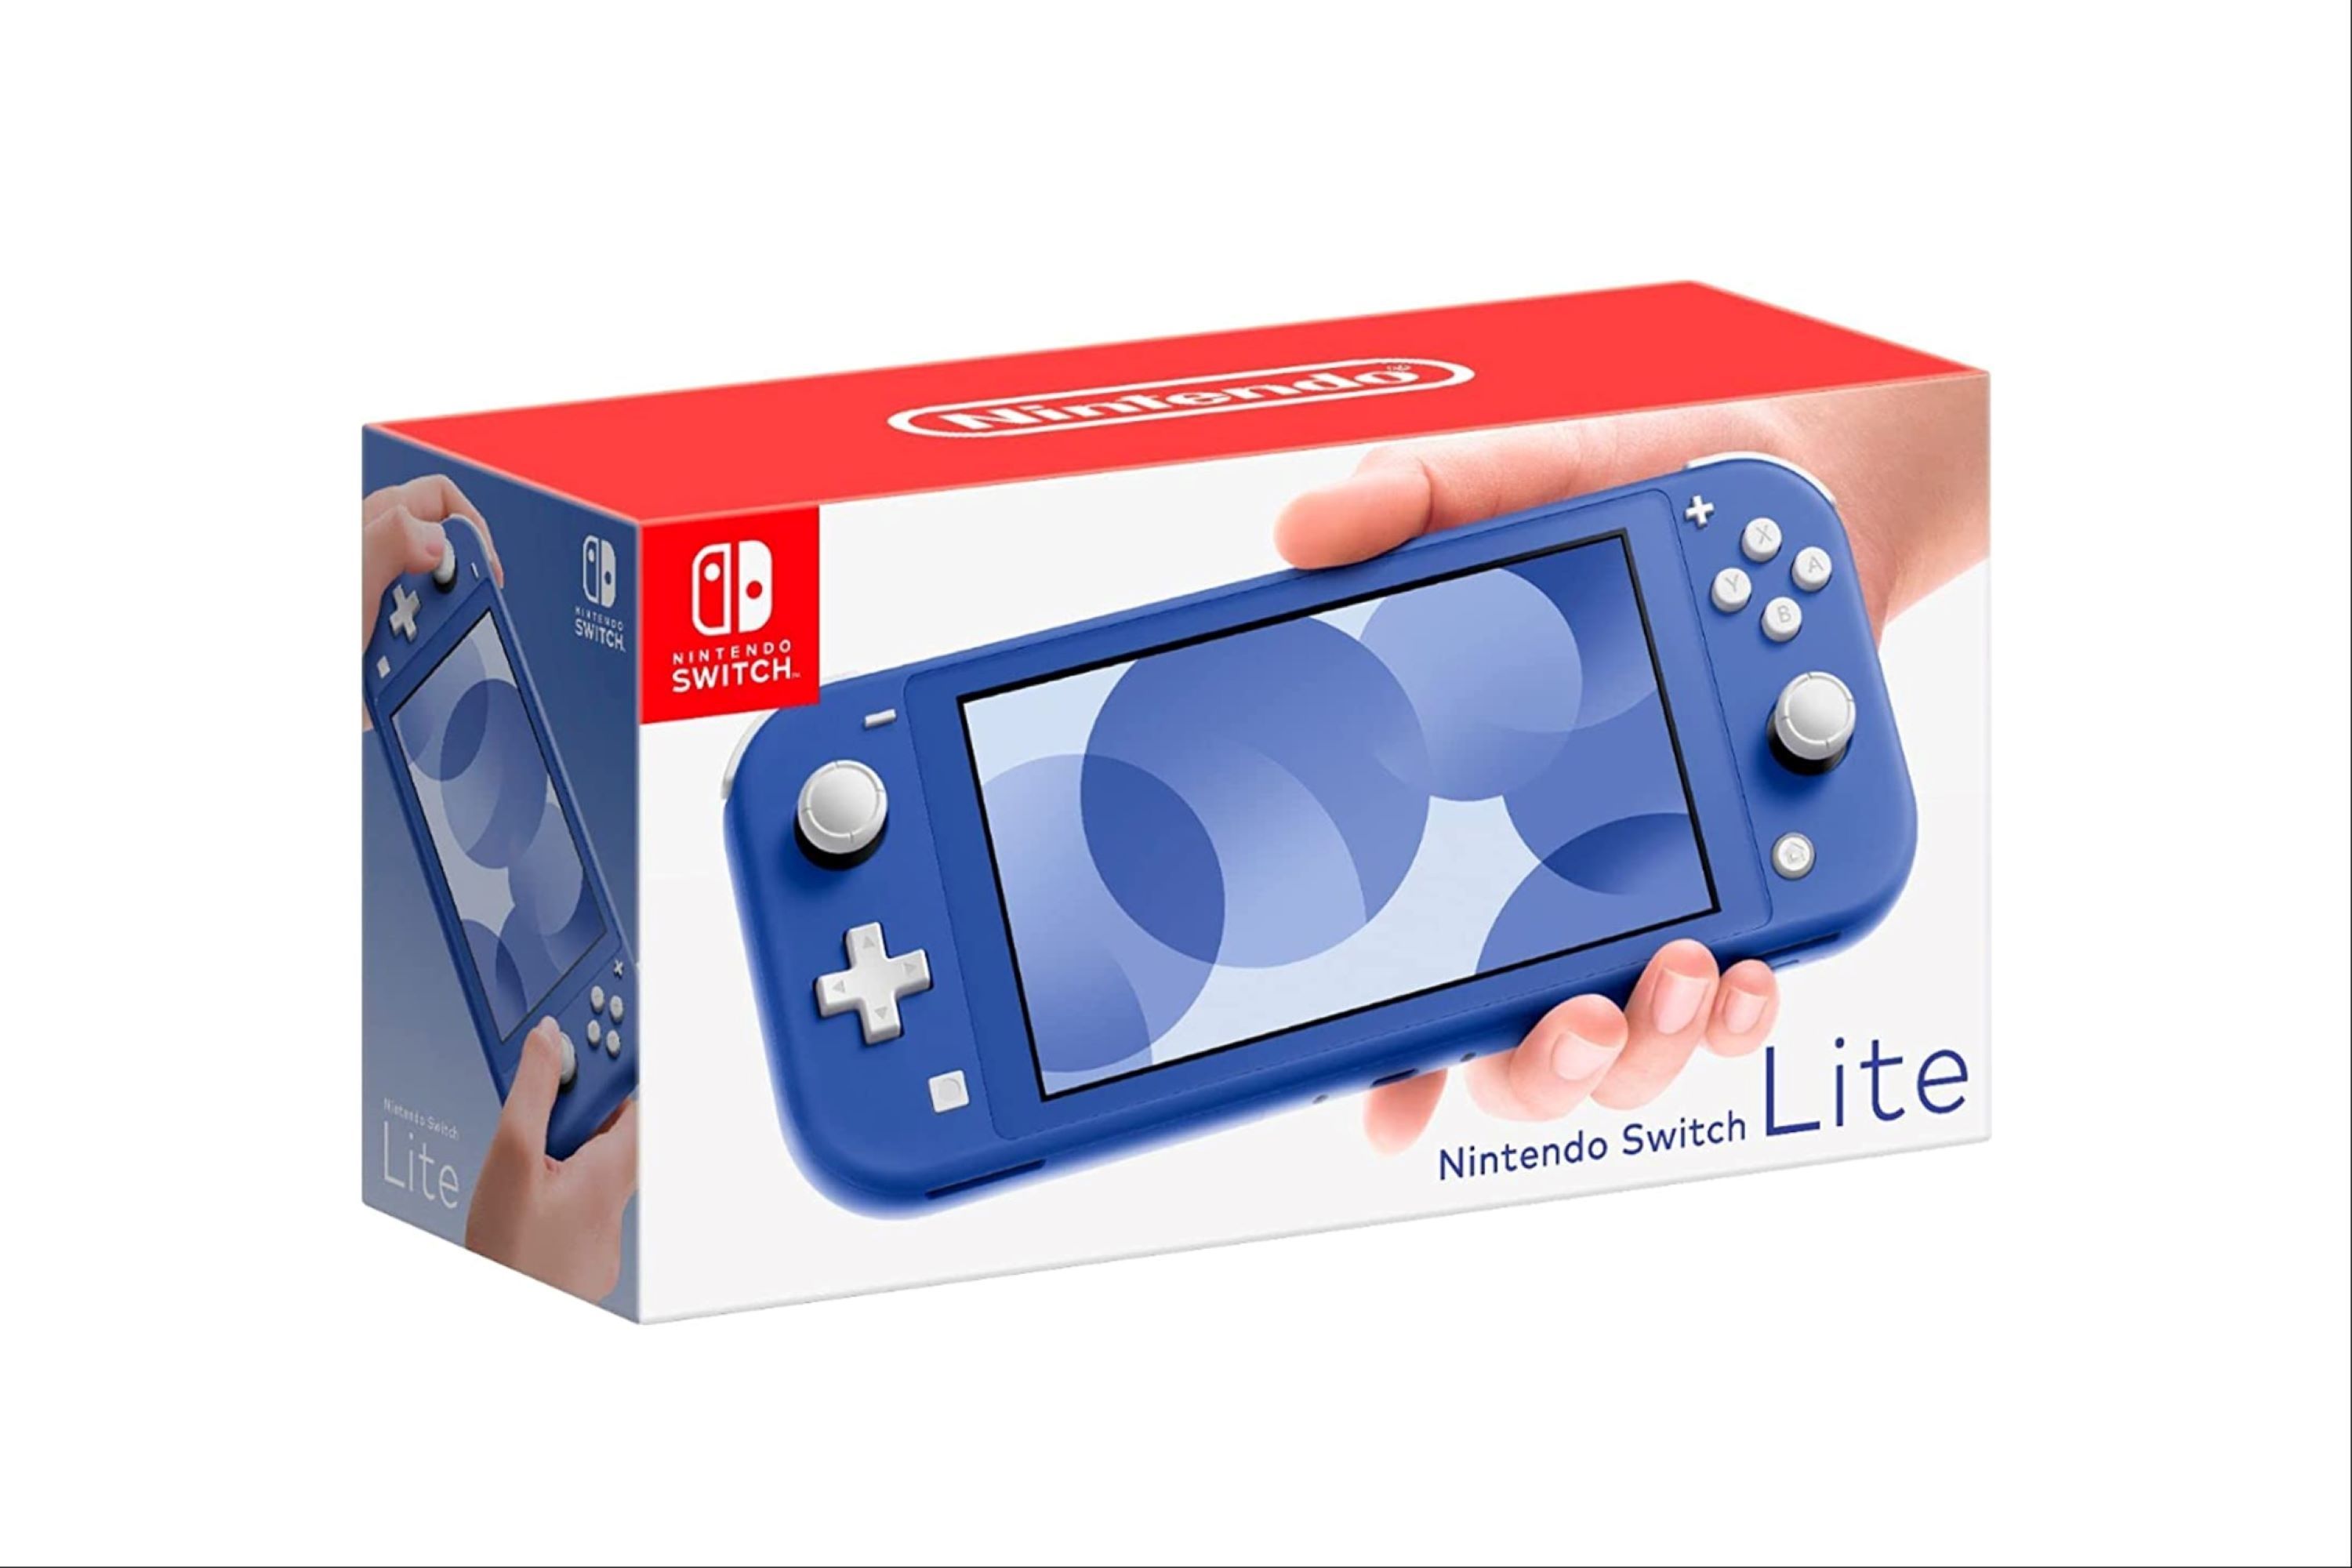 Nintendo Switch Lite, the best affordable Nintendo for new gamers to try out.